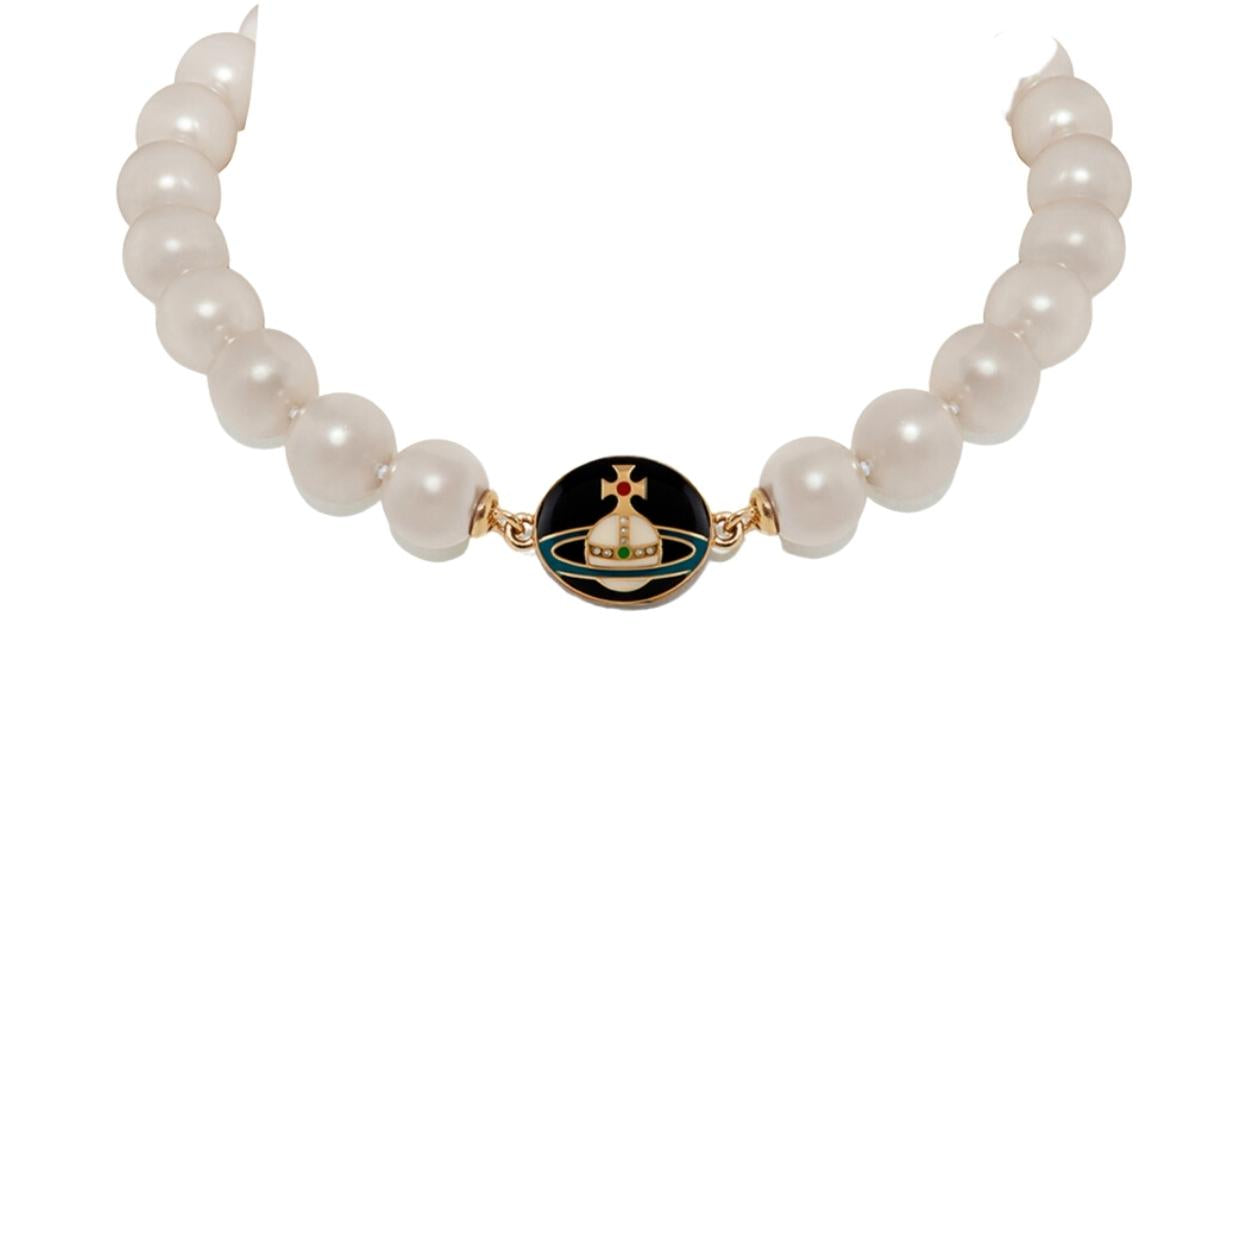 LARGE PEARL NECKLACE WITH SKULL